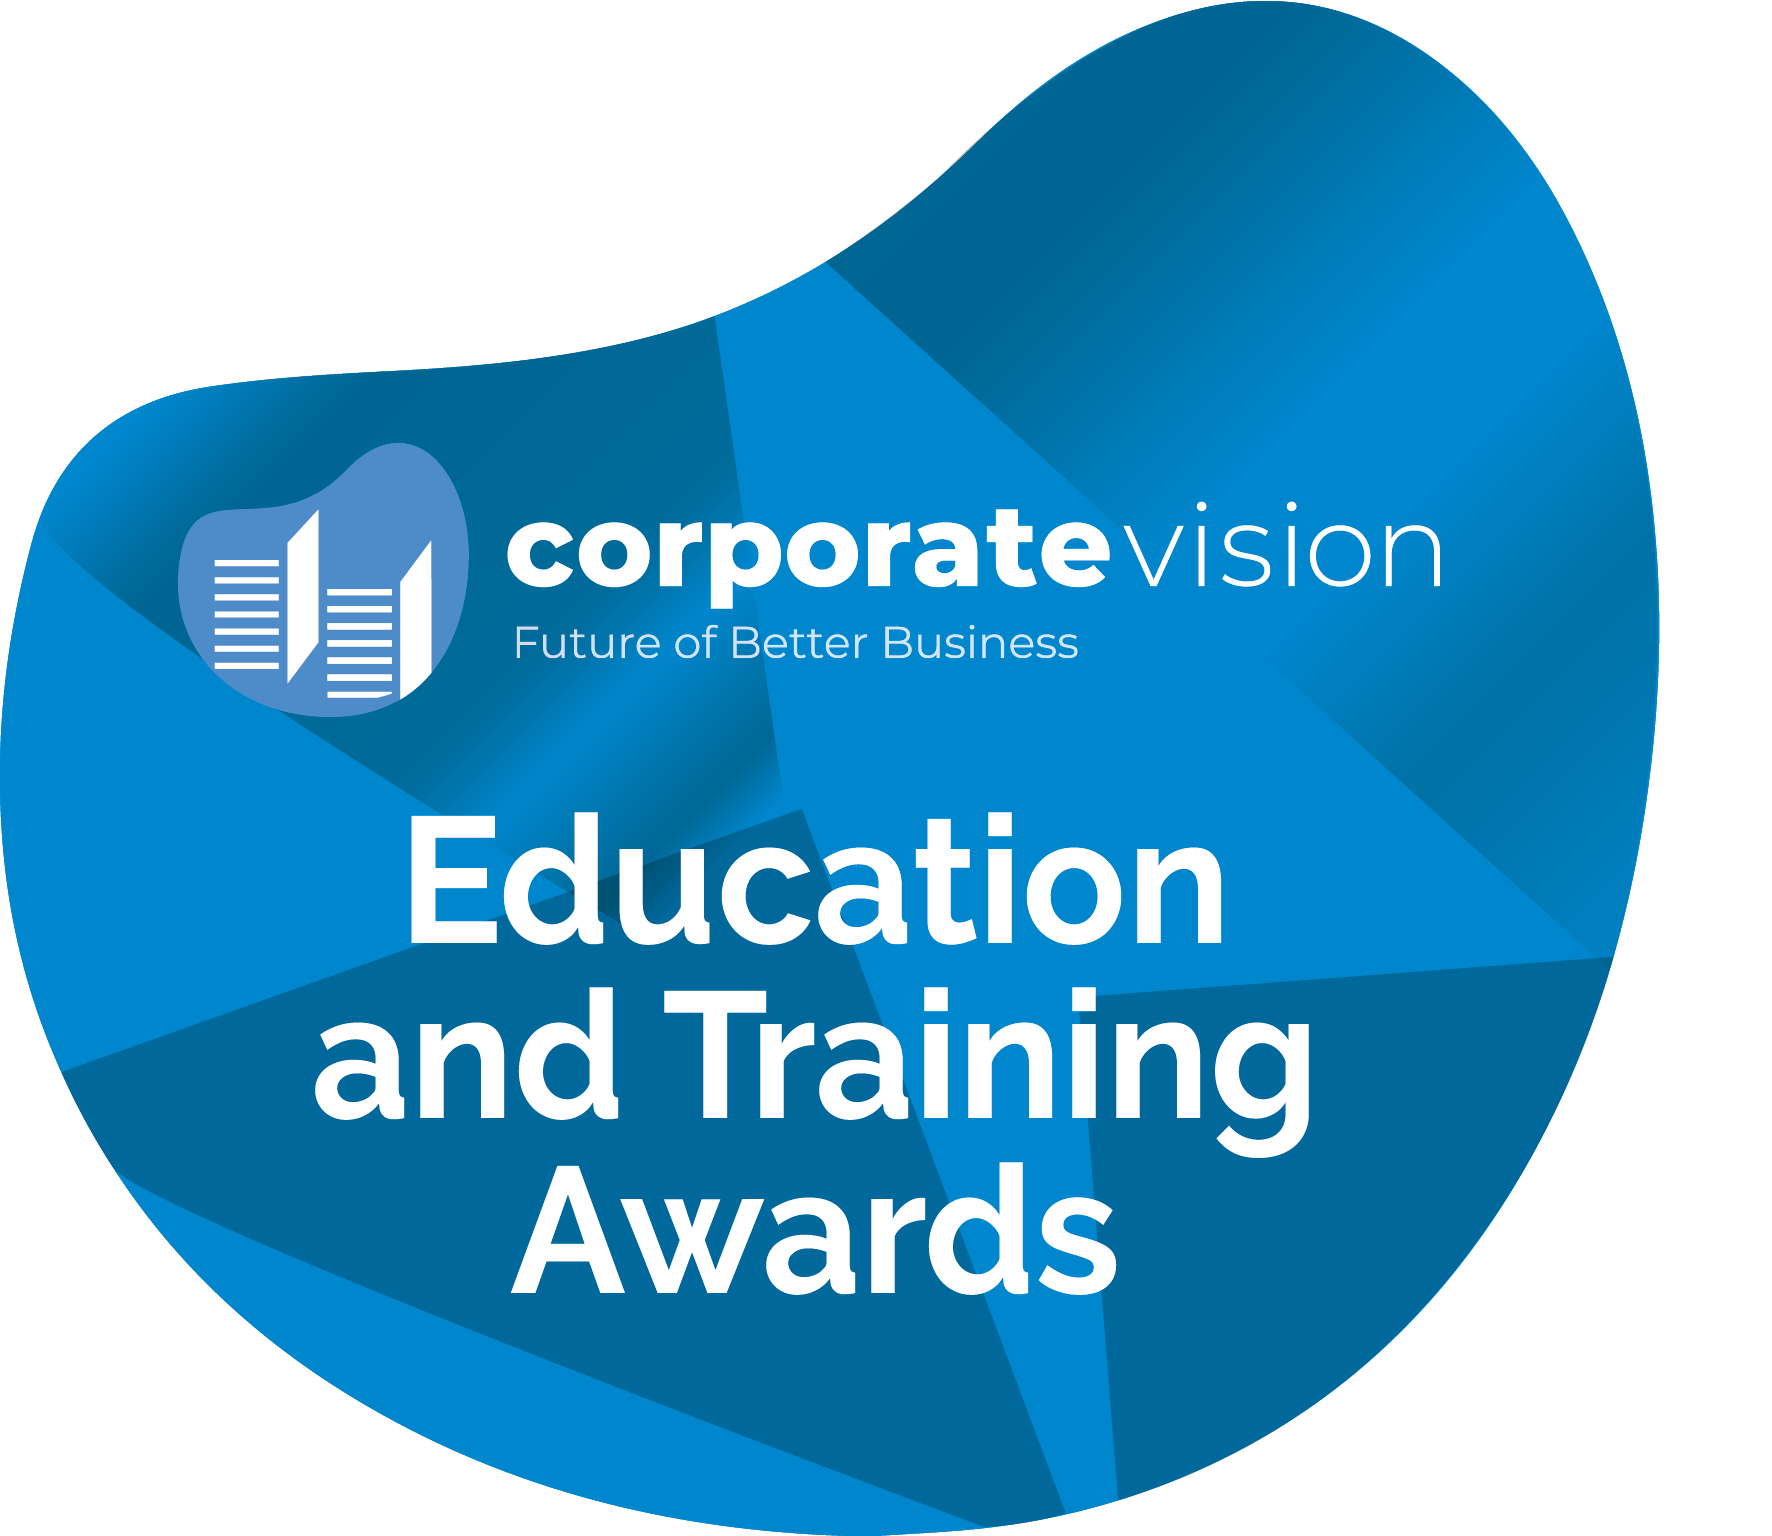 assignment 301 award in education and training